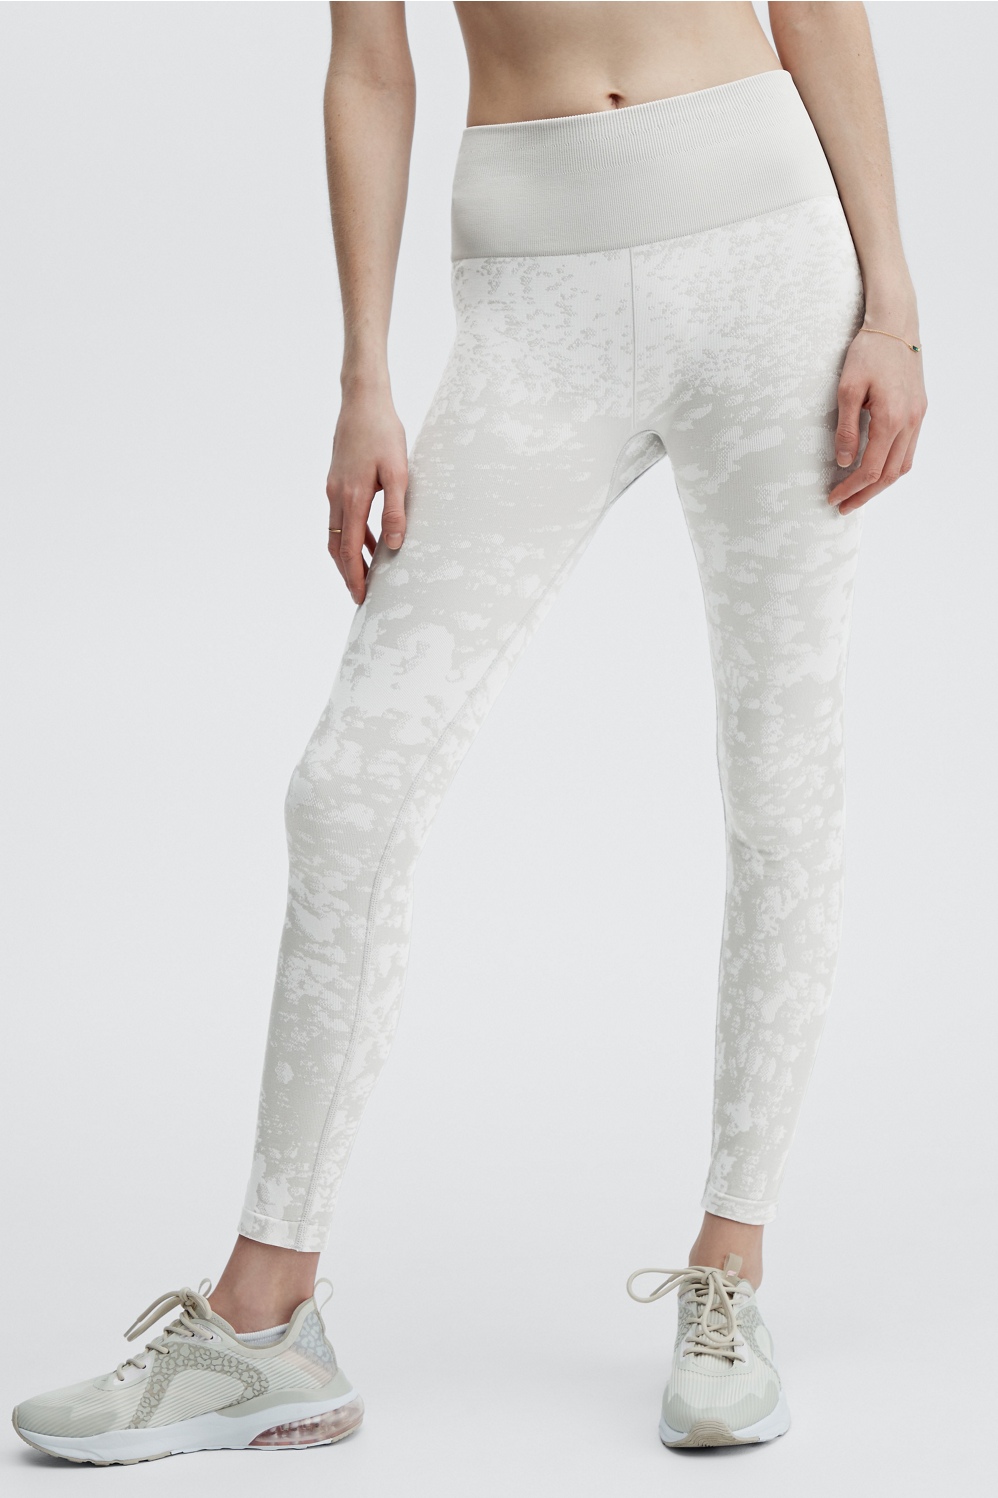 Lululemon Grey and White Marble Leggings- Size 4 (Inseam 27.5) – The Saved  Collection